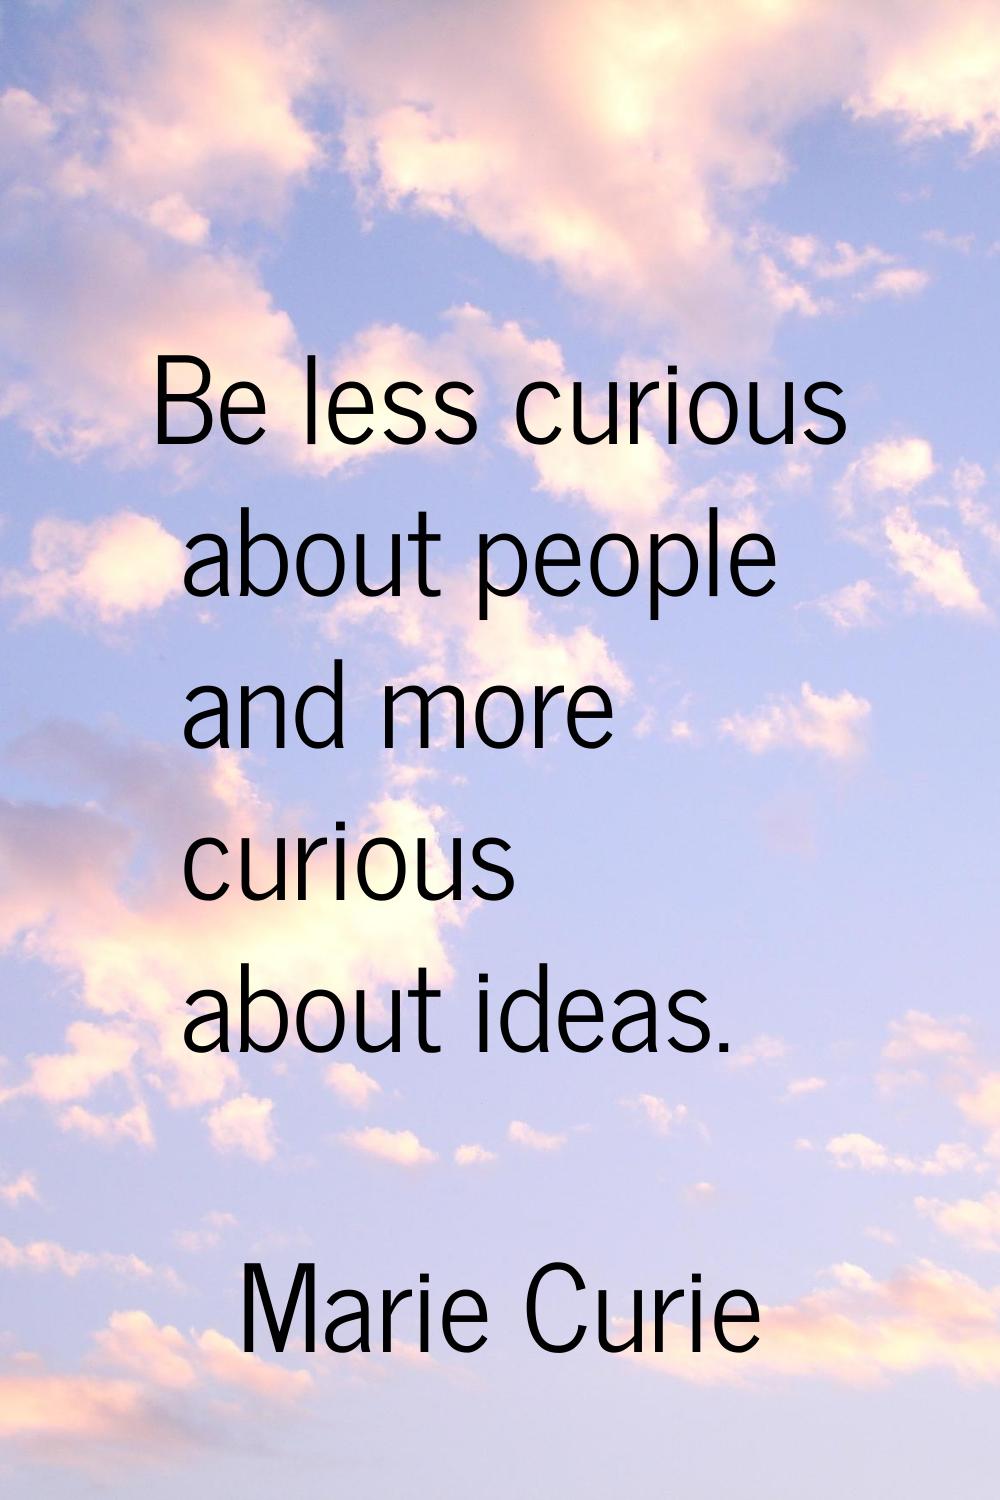 Be less curious about people and more curious about ideas.